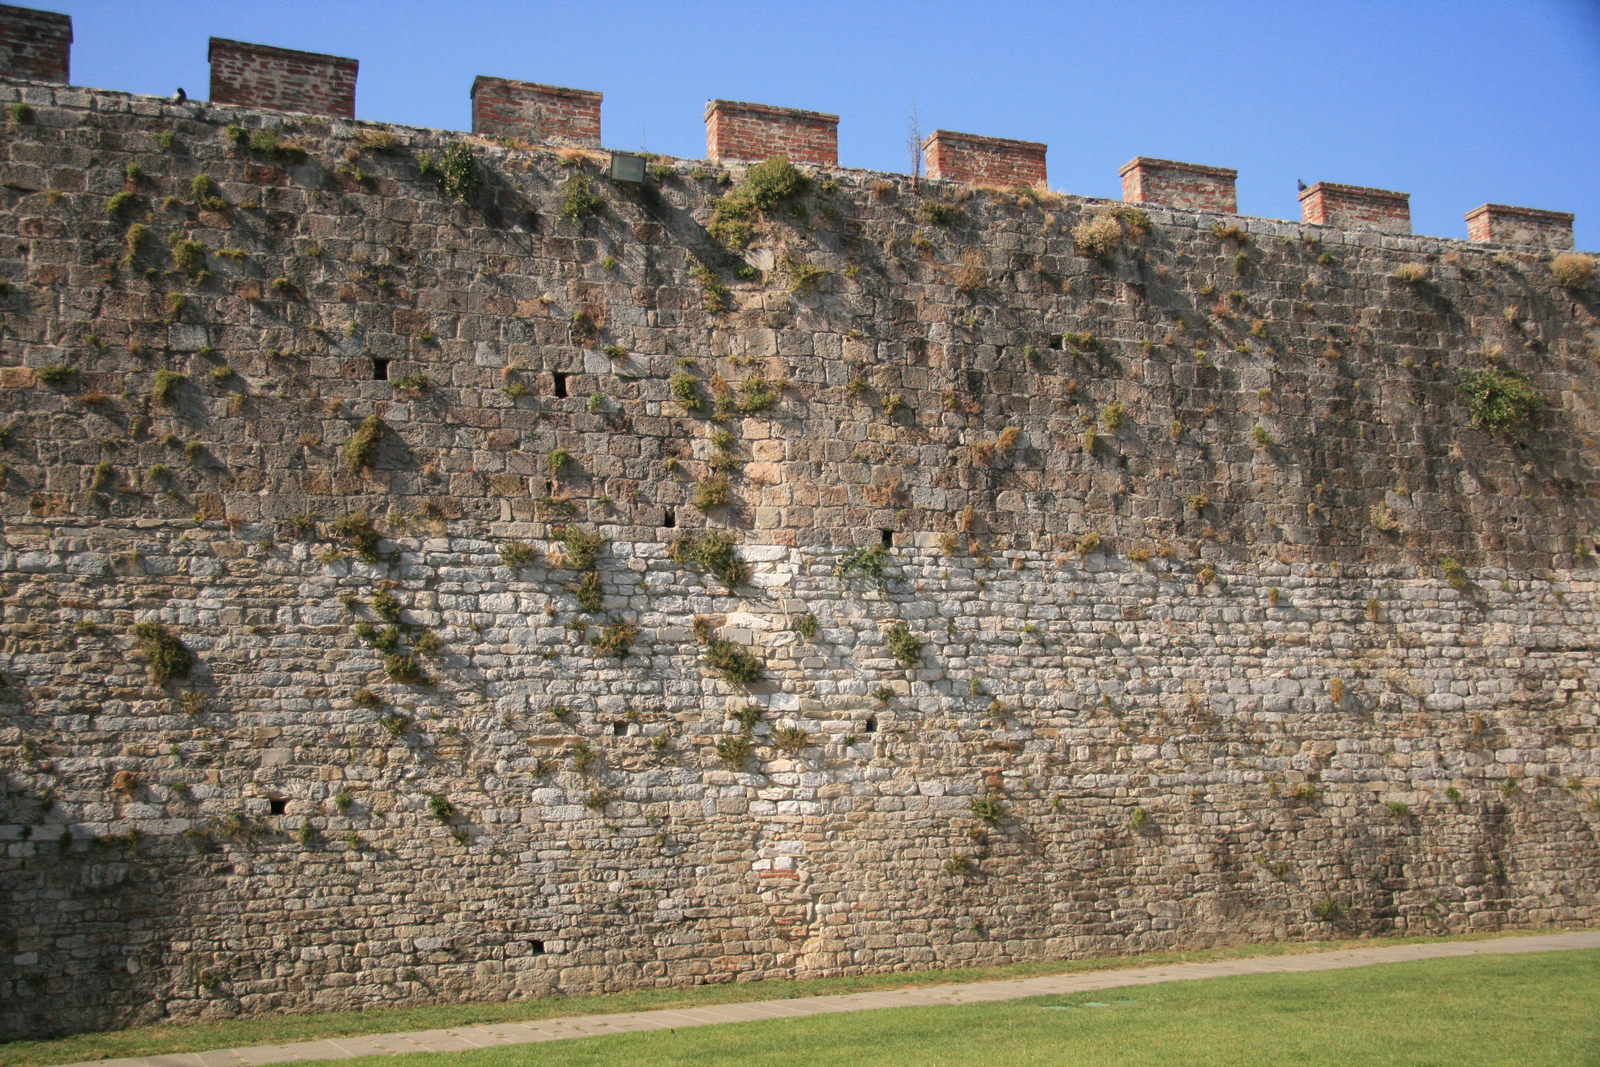 [Picture: City wall]